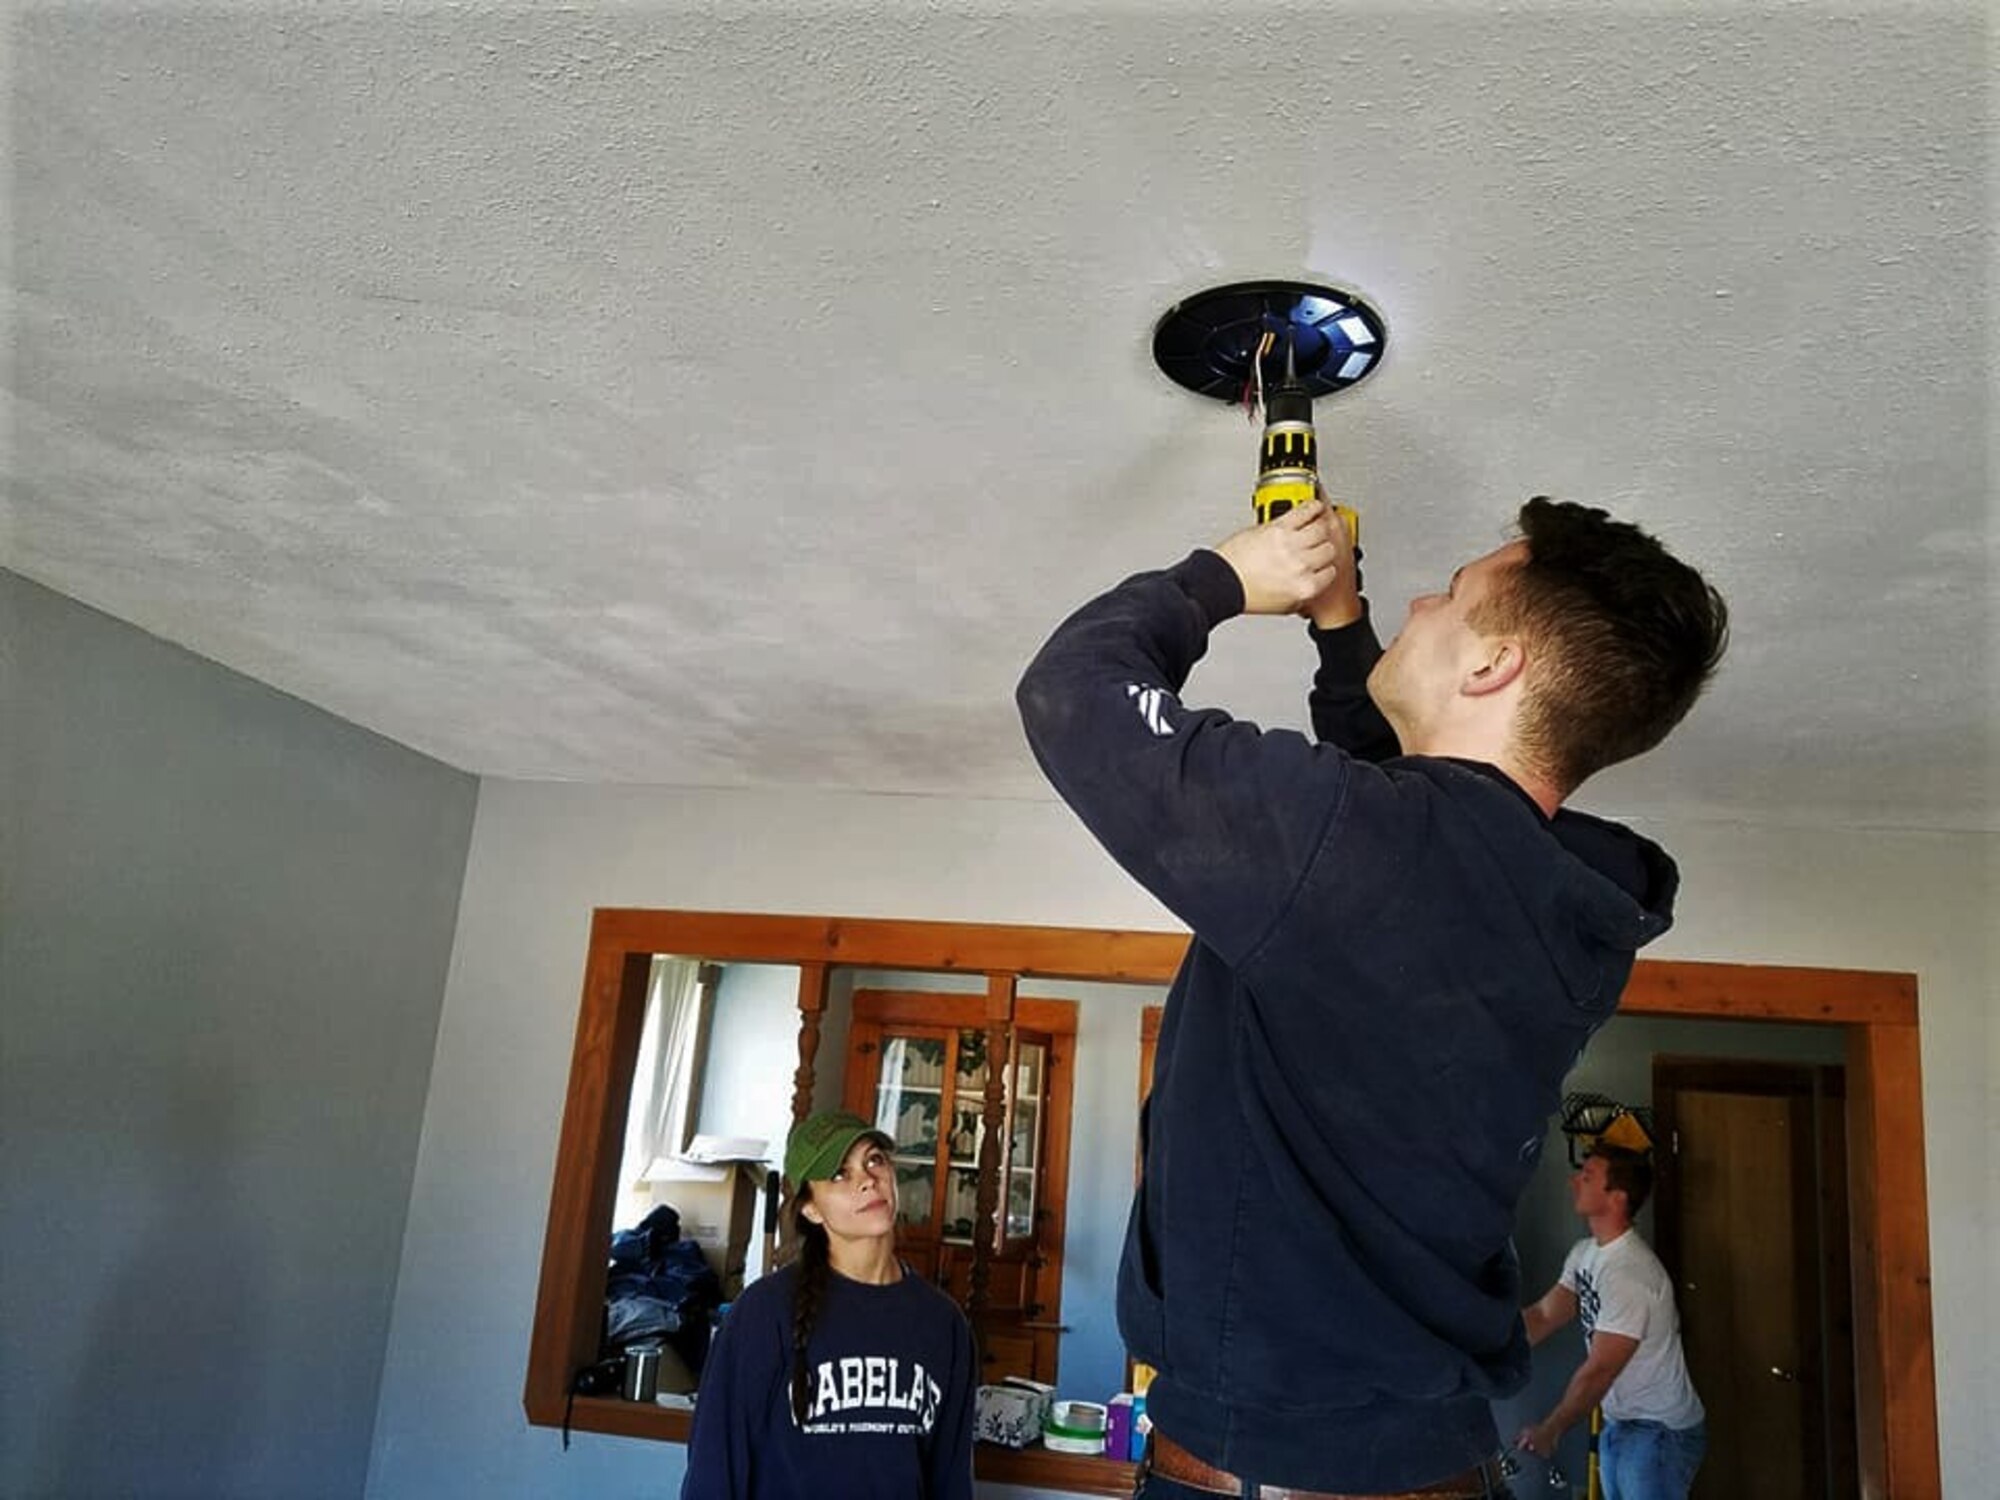 A group of student pilots from Vance Air Force Base, Oklahoma, volunteered with the local Habitat for Humanity to help paint, do some small repairs and install light fixtures and fans during a critical home repair after a local veteran’s home caught fire. (Courtesy photo)